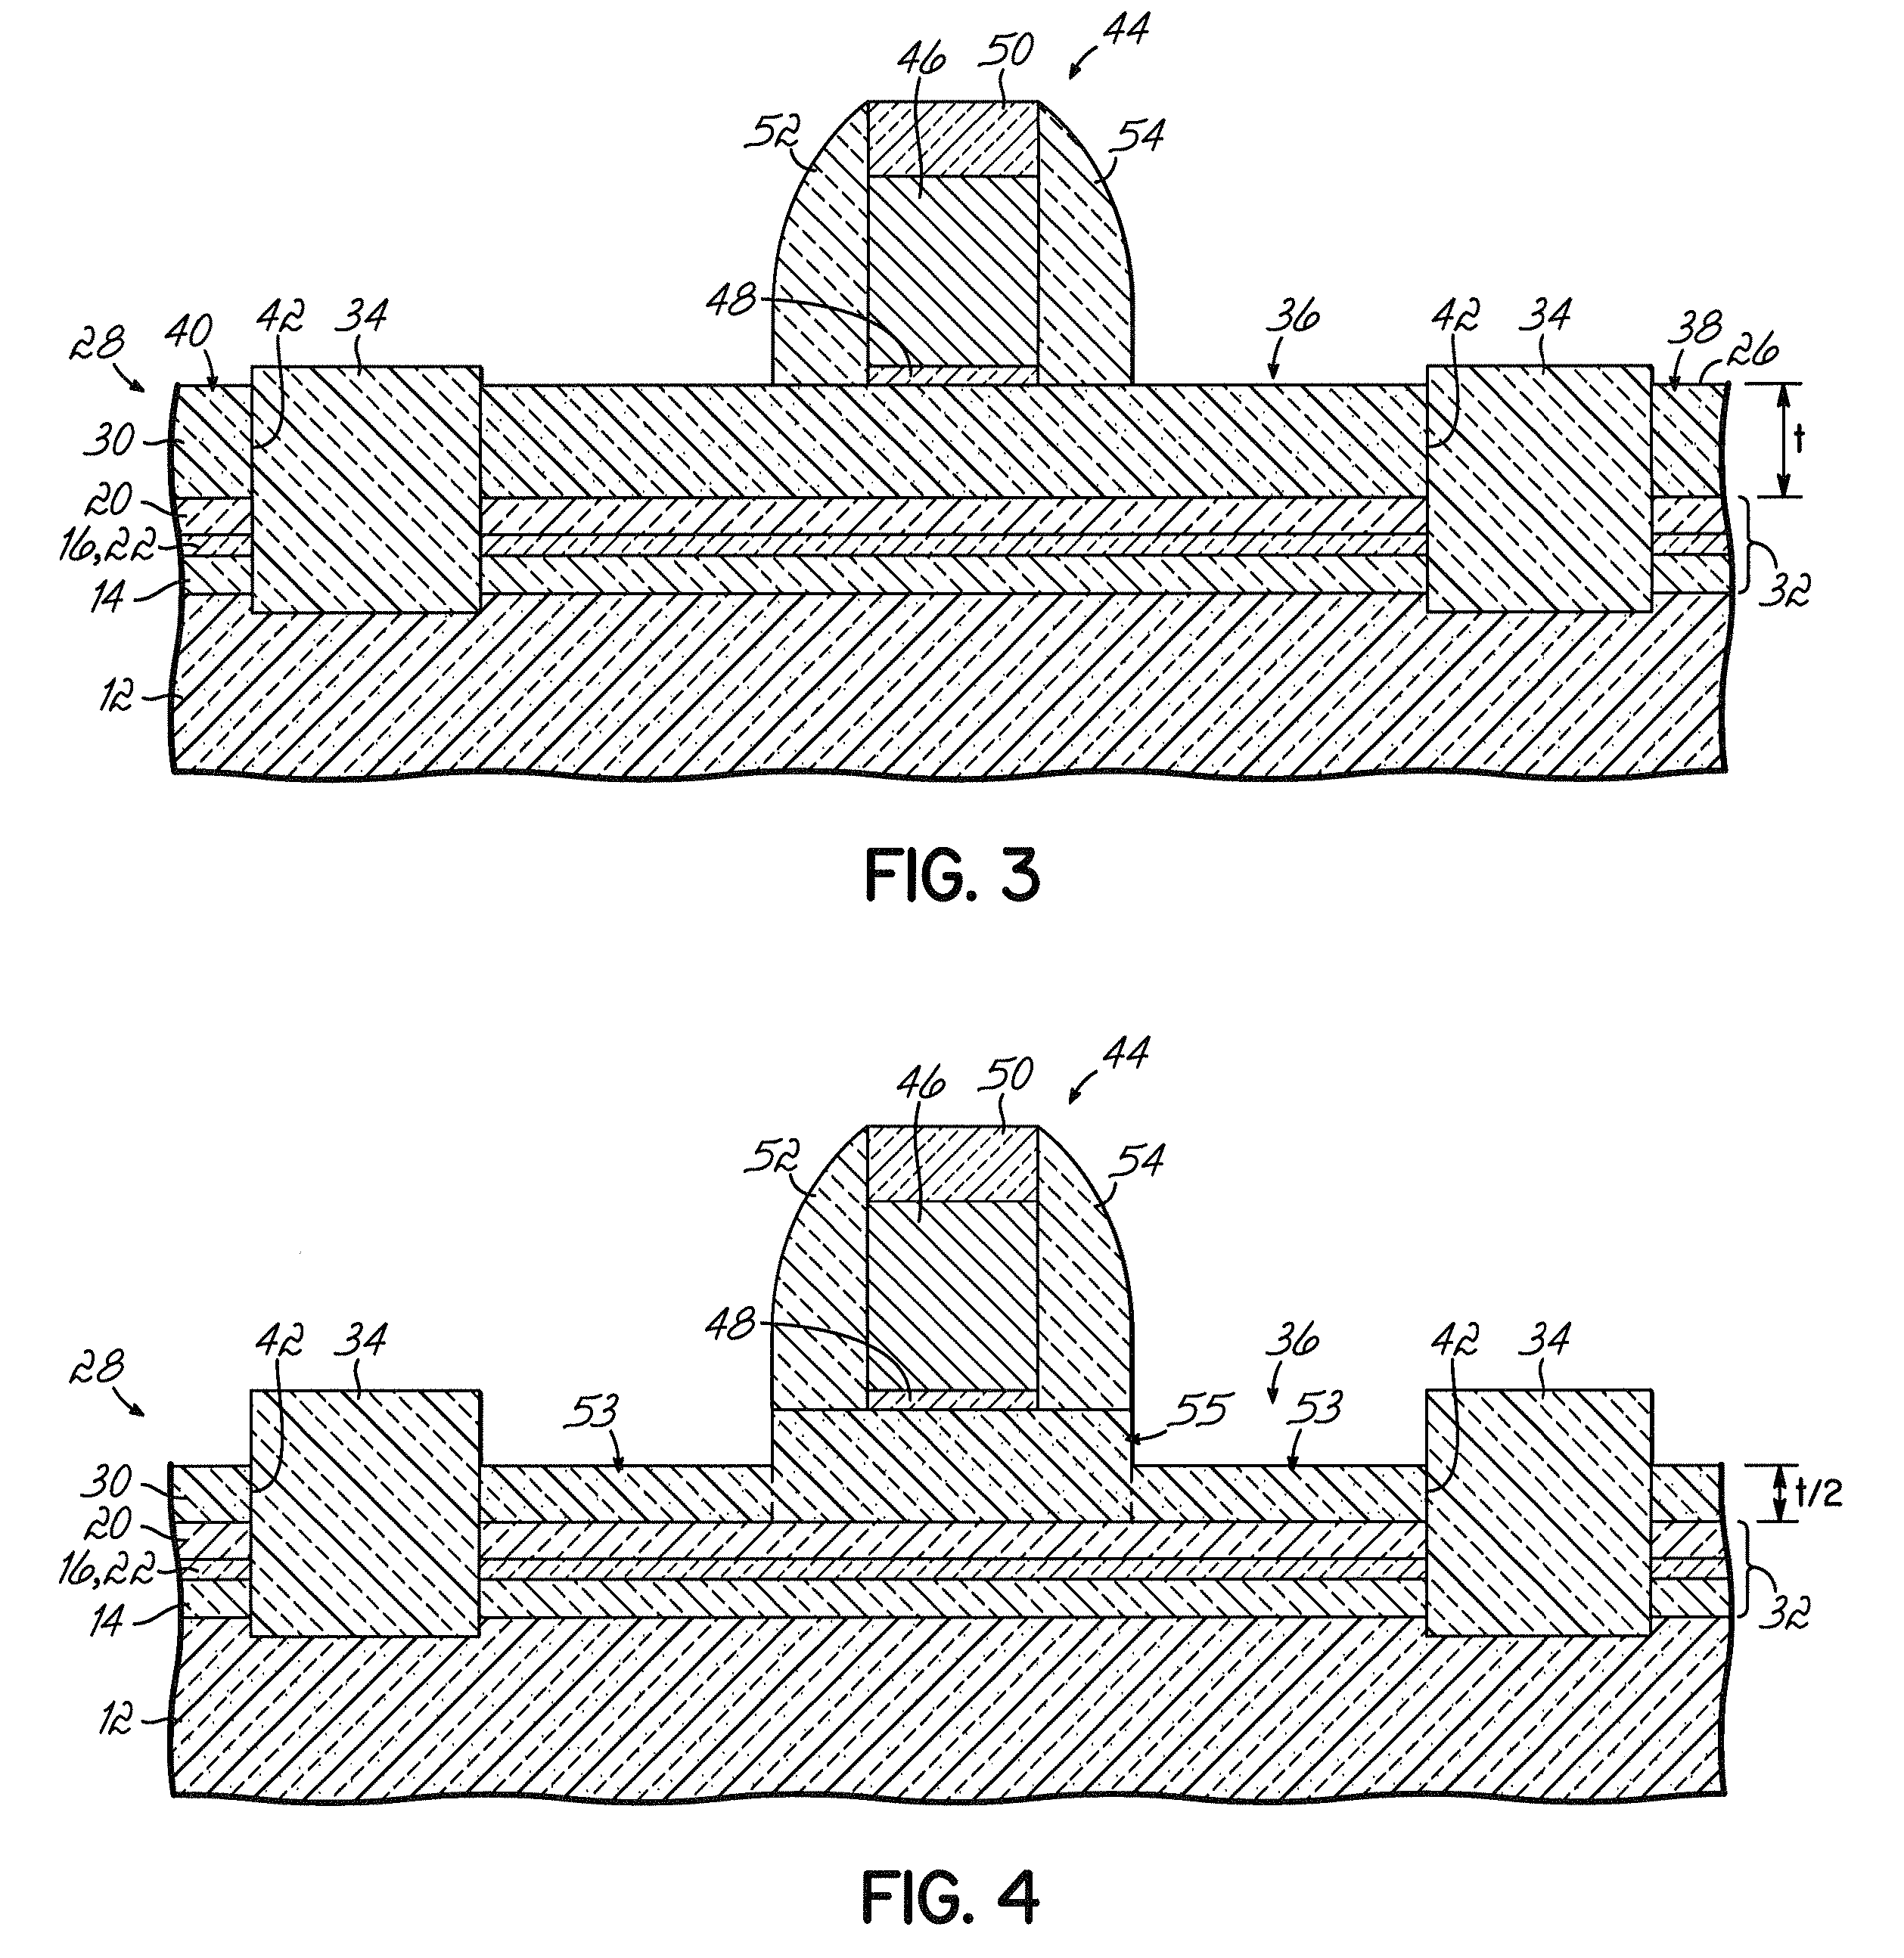 Semiconductor device structures with reduced junction capacitance and drain induced barrier lowering and methods for fabricating such device structures and for fabricating a semiconductor-on-insulator substrate